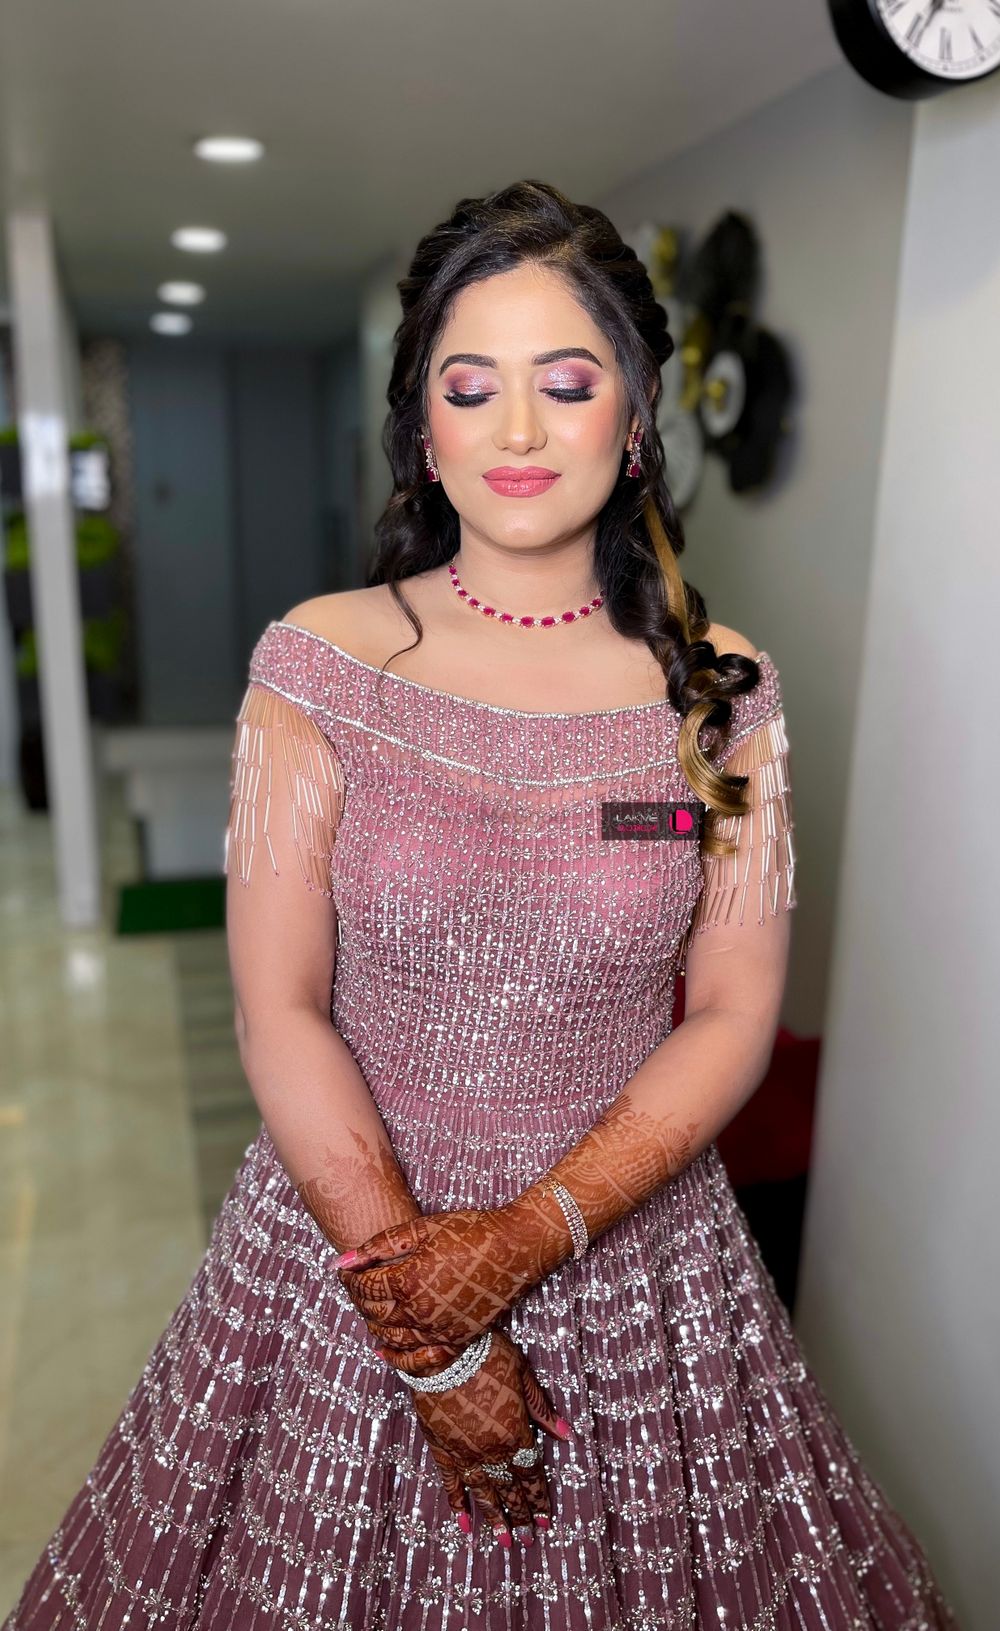 Photo From Engagement Looks - By Lakme Salon, Dakbunglow